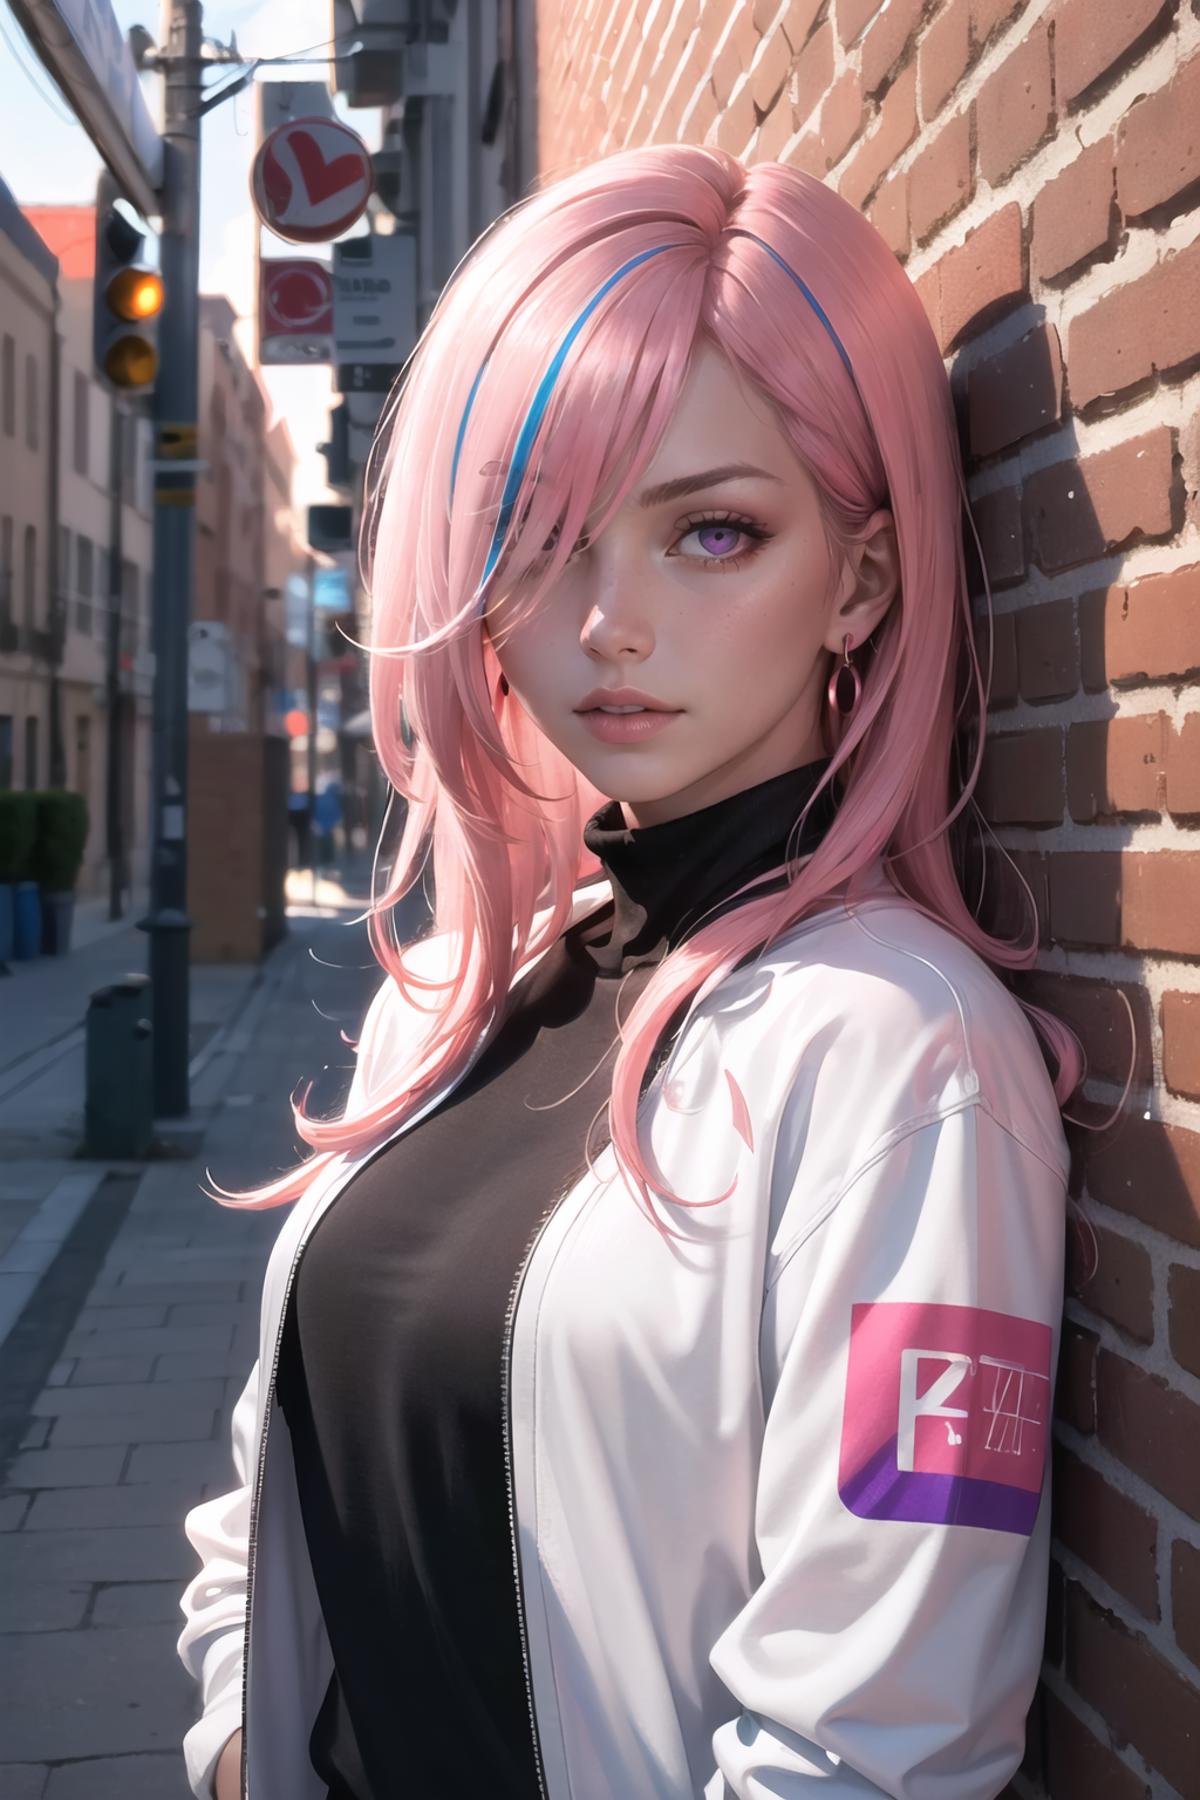 Pink-haired woman with blue eyes and a black top leans against a brick wall.